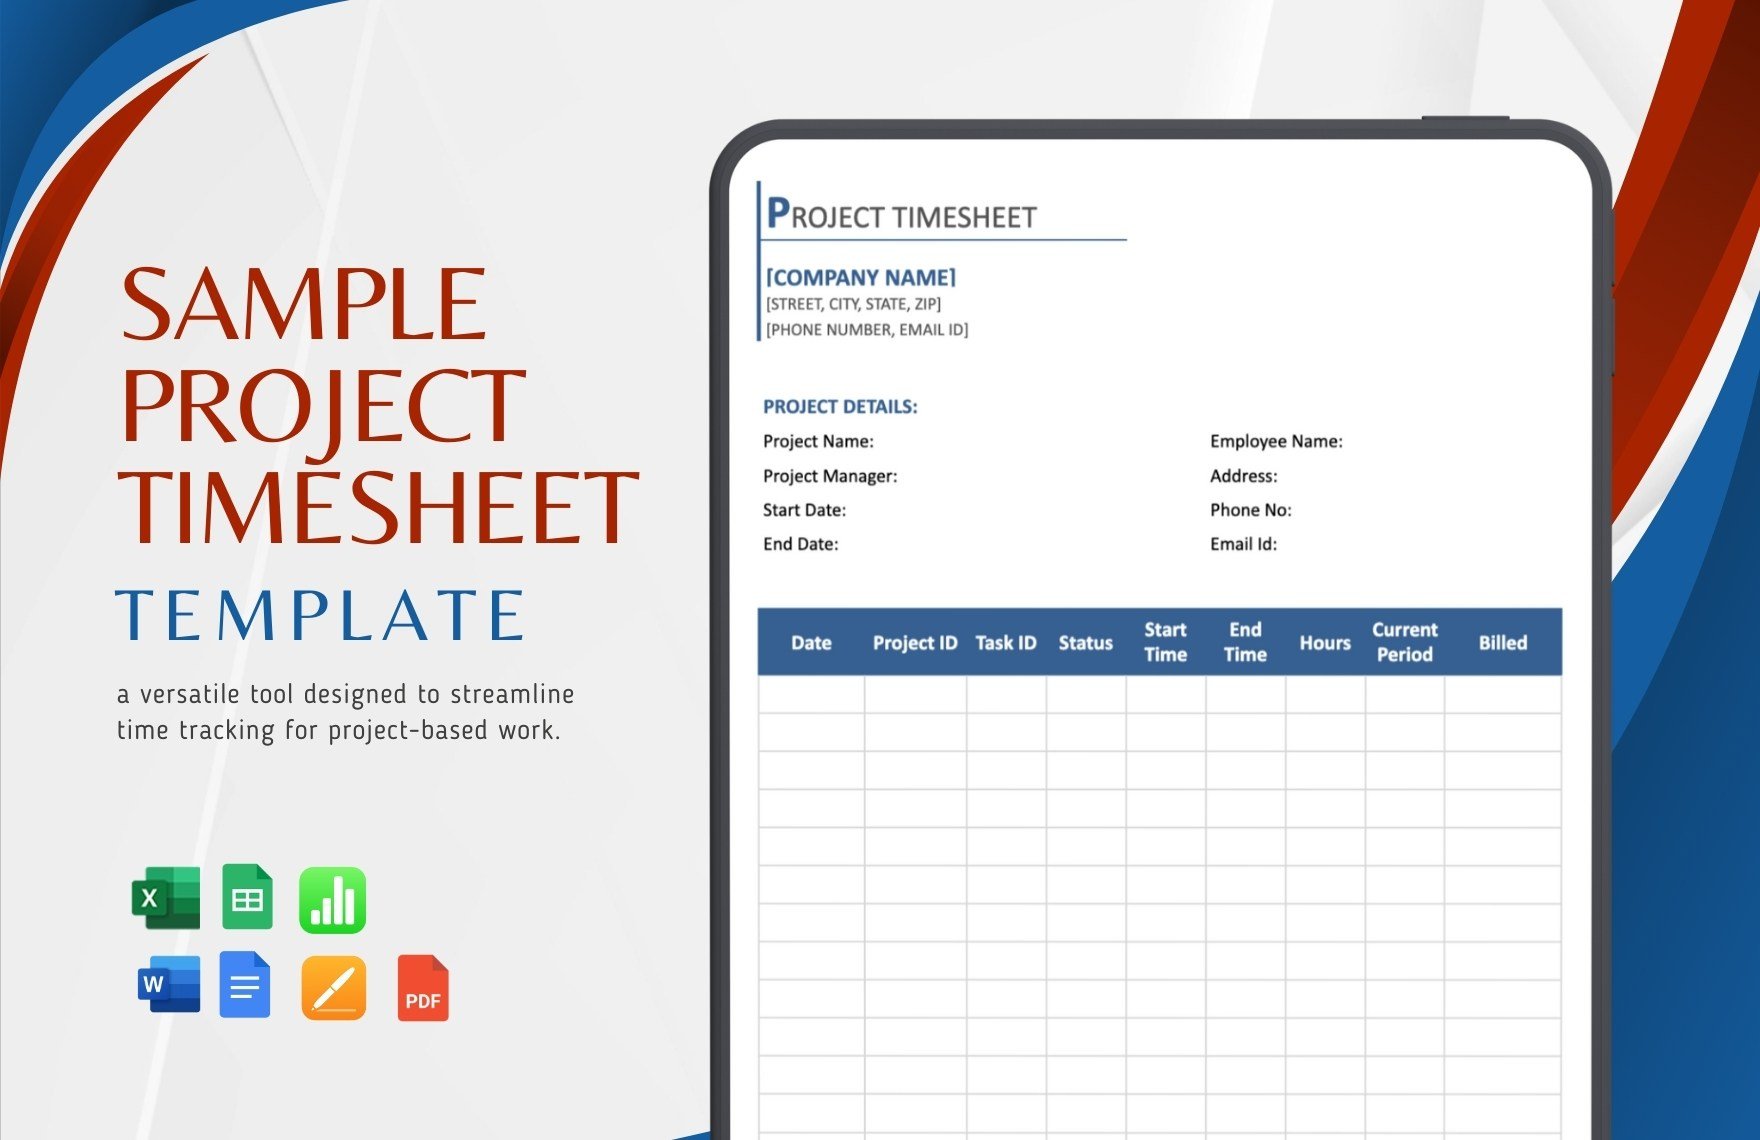 Sample Project Timesheet Template